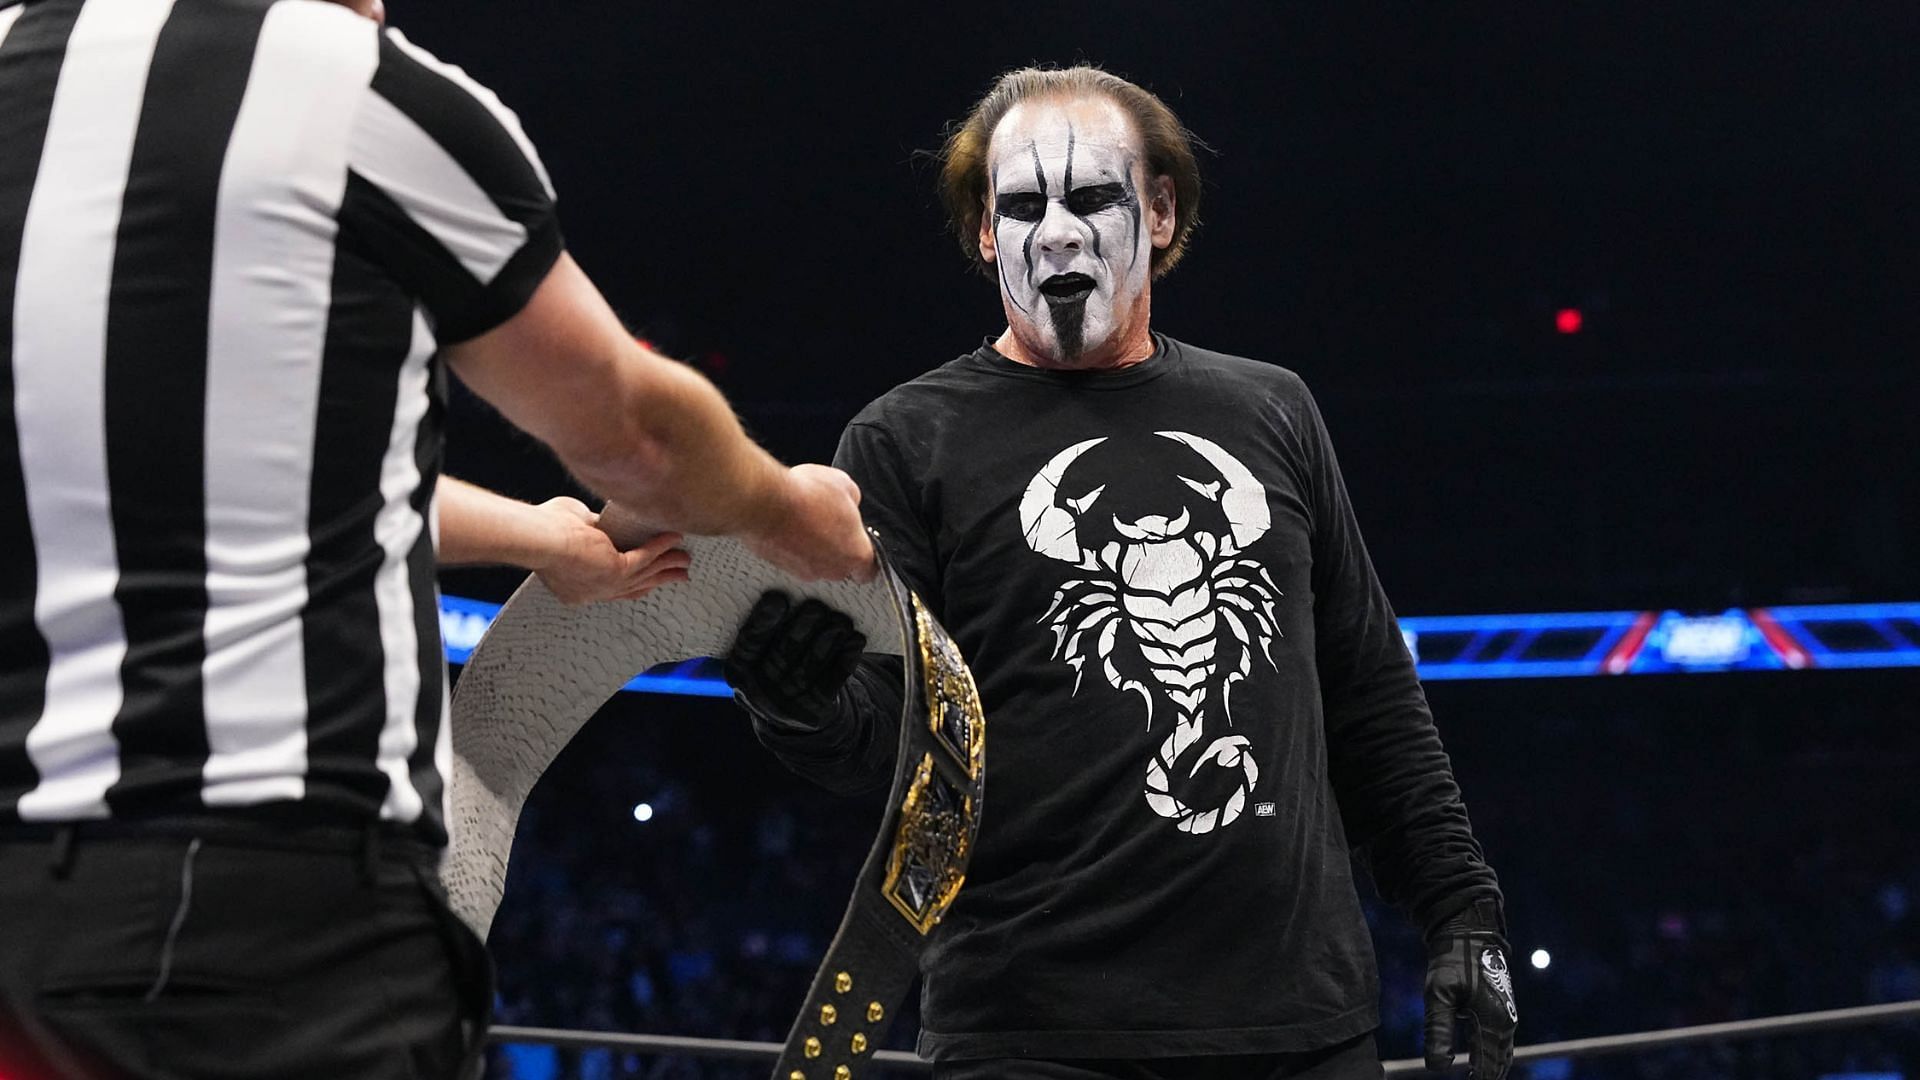 Sting captured his first AEW title a few days ago on Dynamite